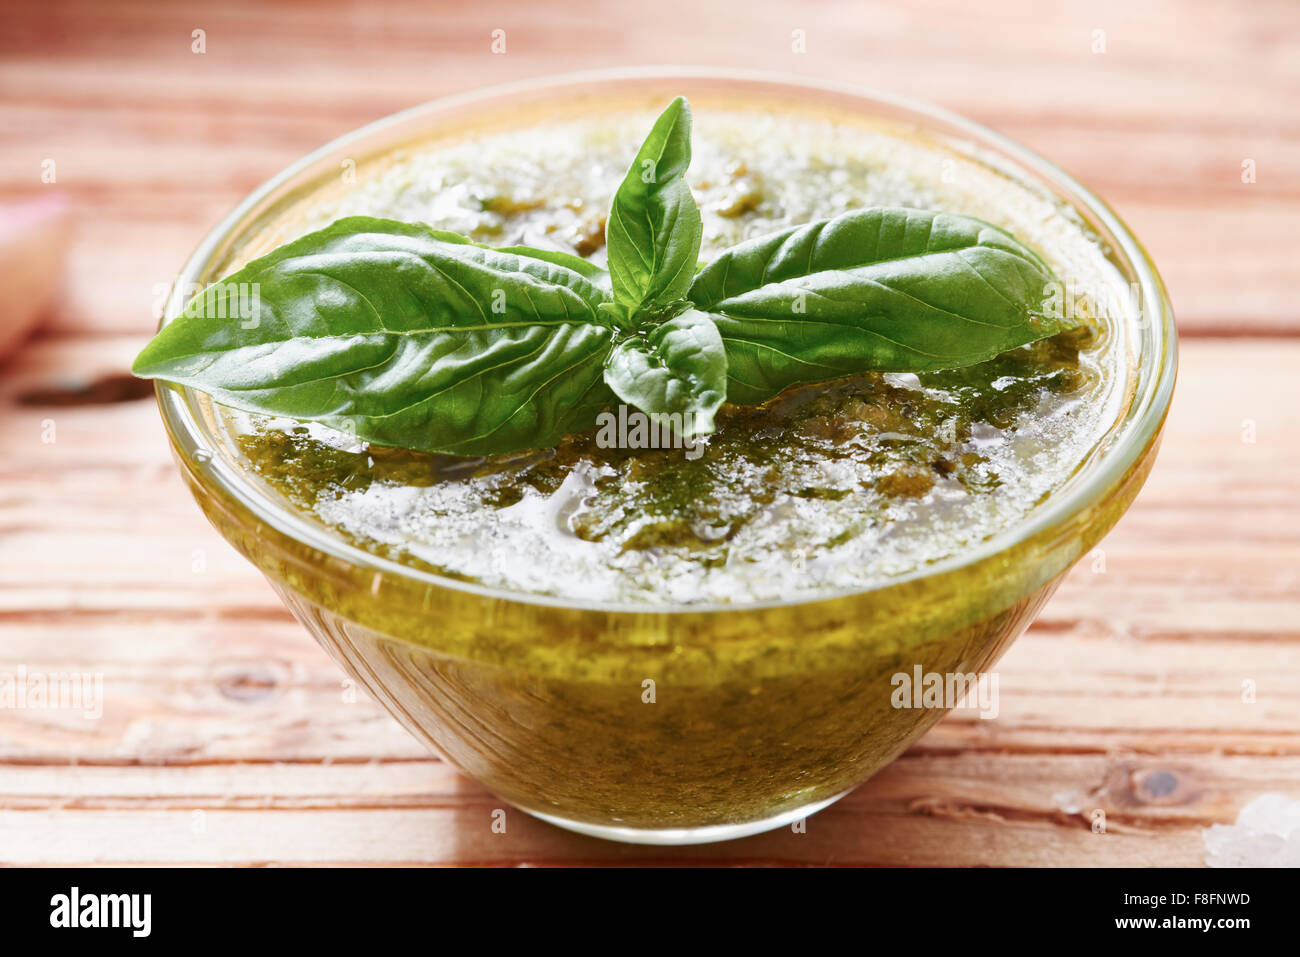 Pesto sauce on wooden table surrounded by ingredients Stock Photo